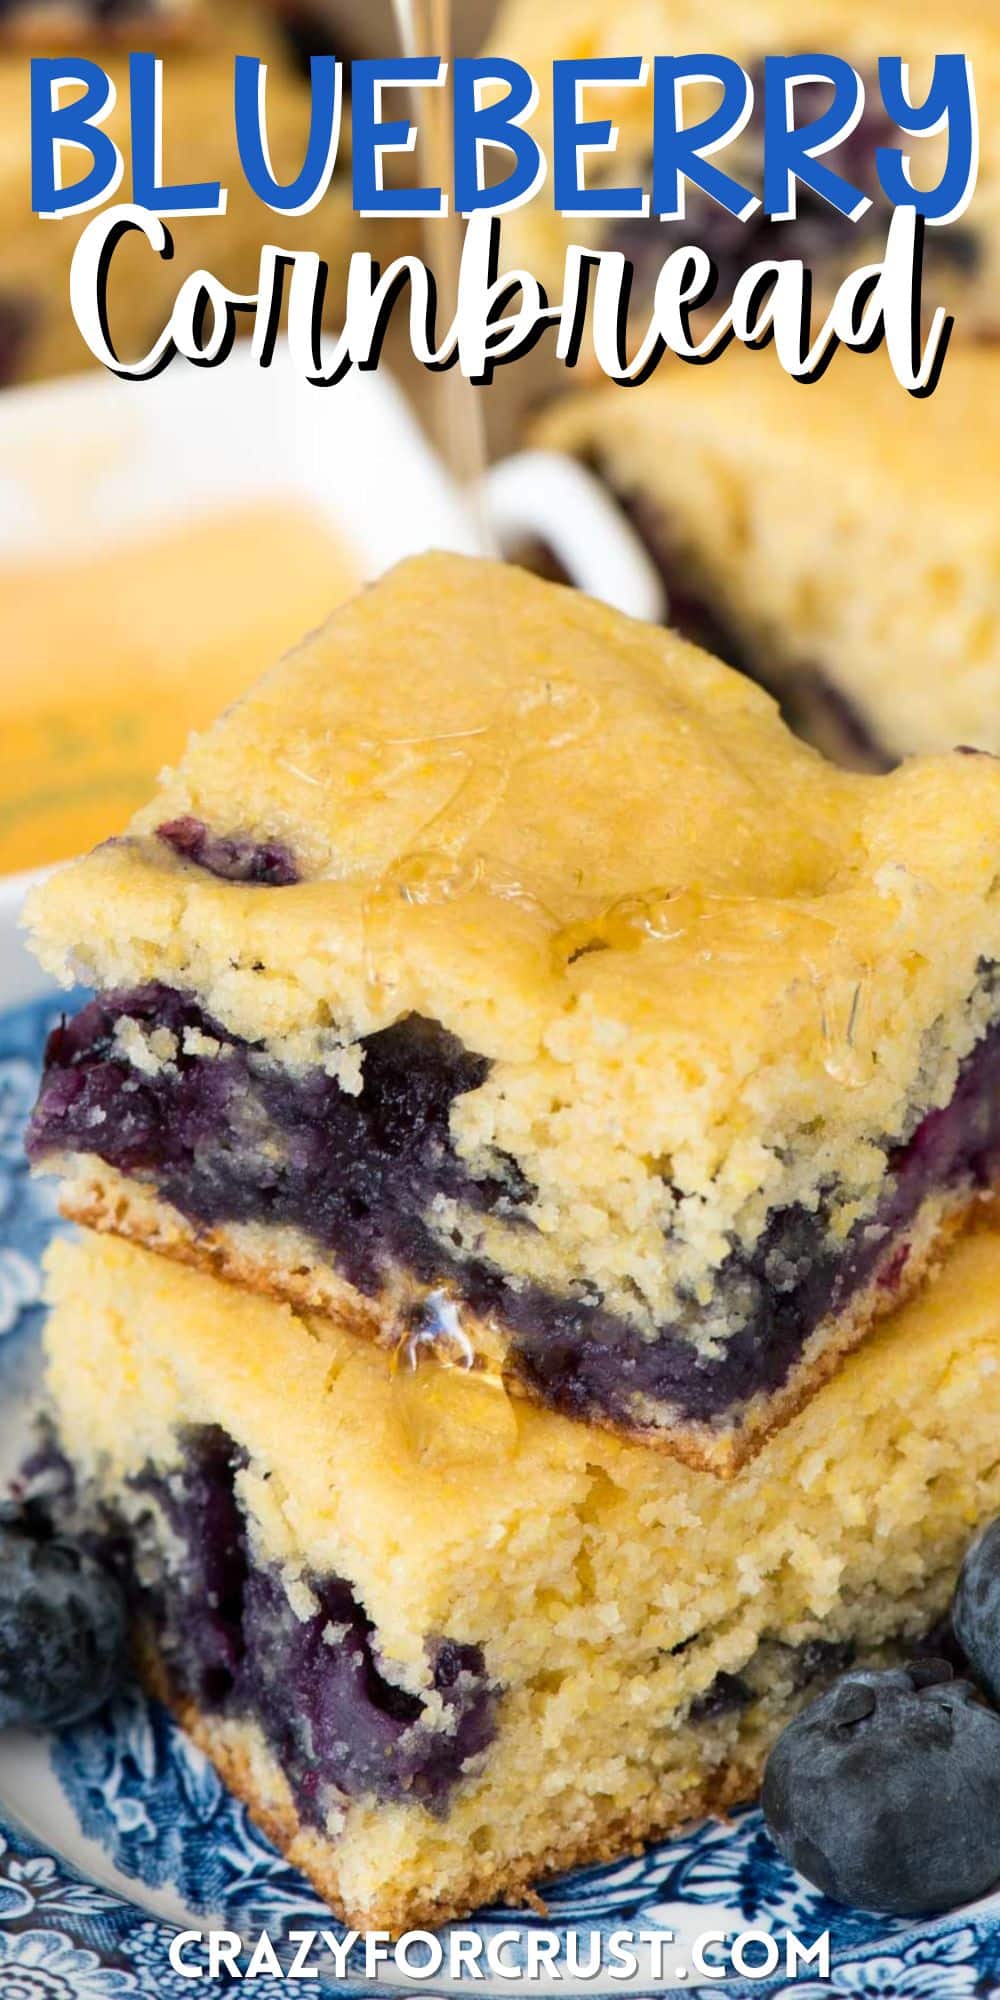 stacked cornbread on a blue and white plate surrounded by blueberries with words on the image.